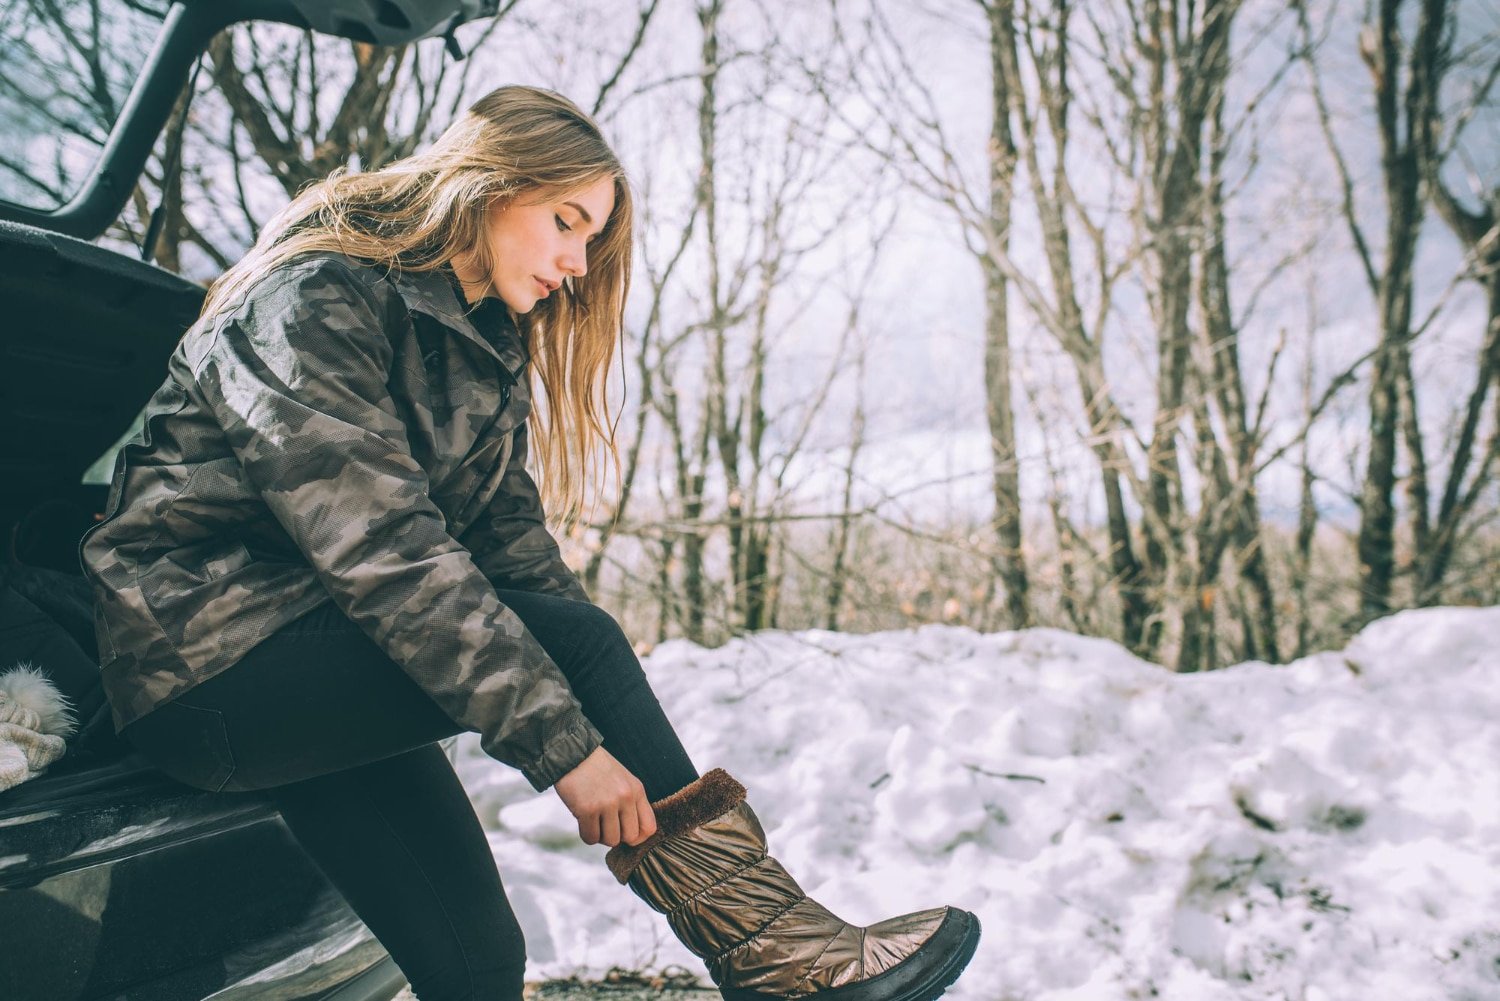 Stay Warm And Stylish With Sorel Canada’s Durable Footwear